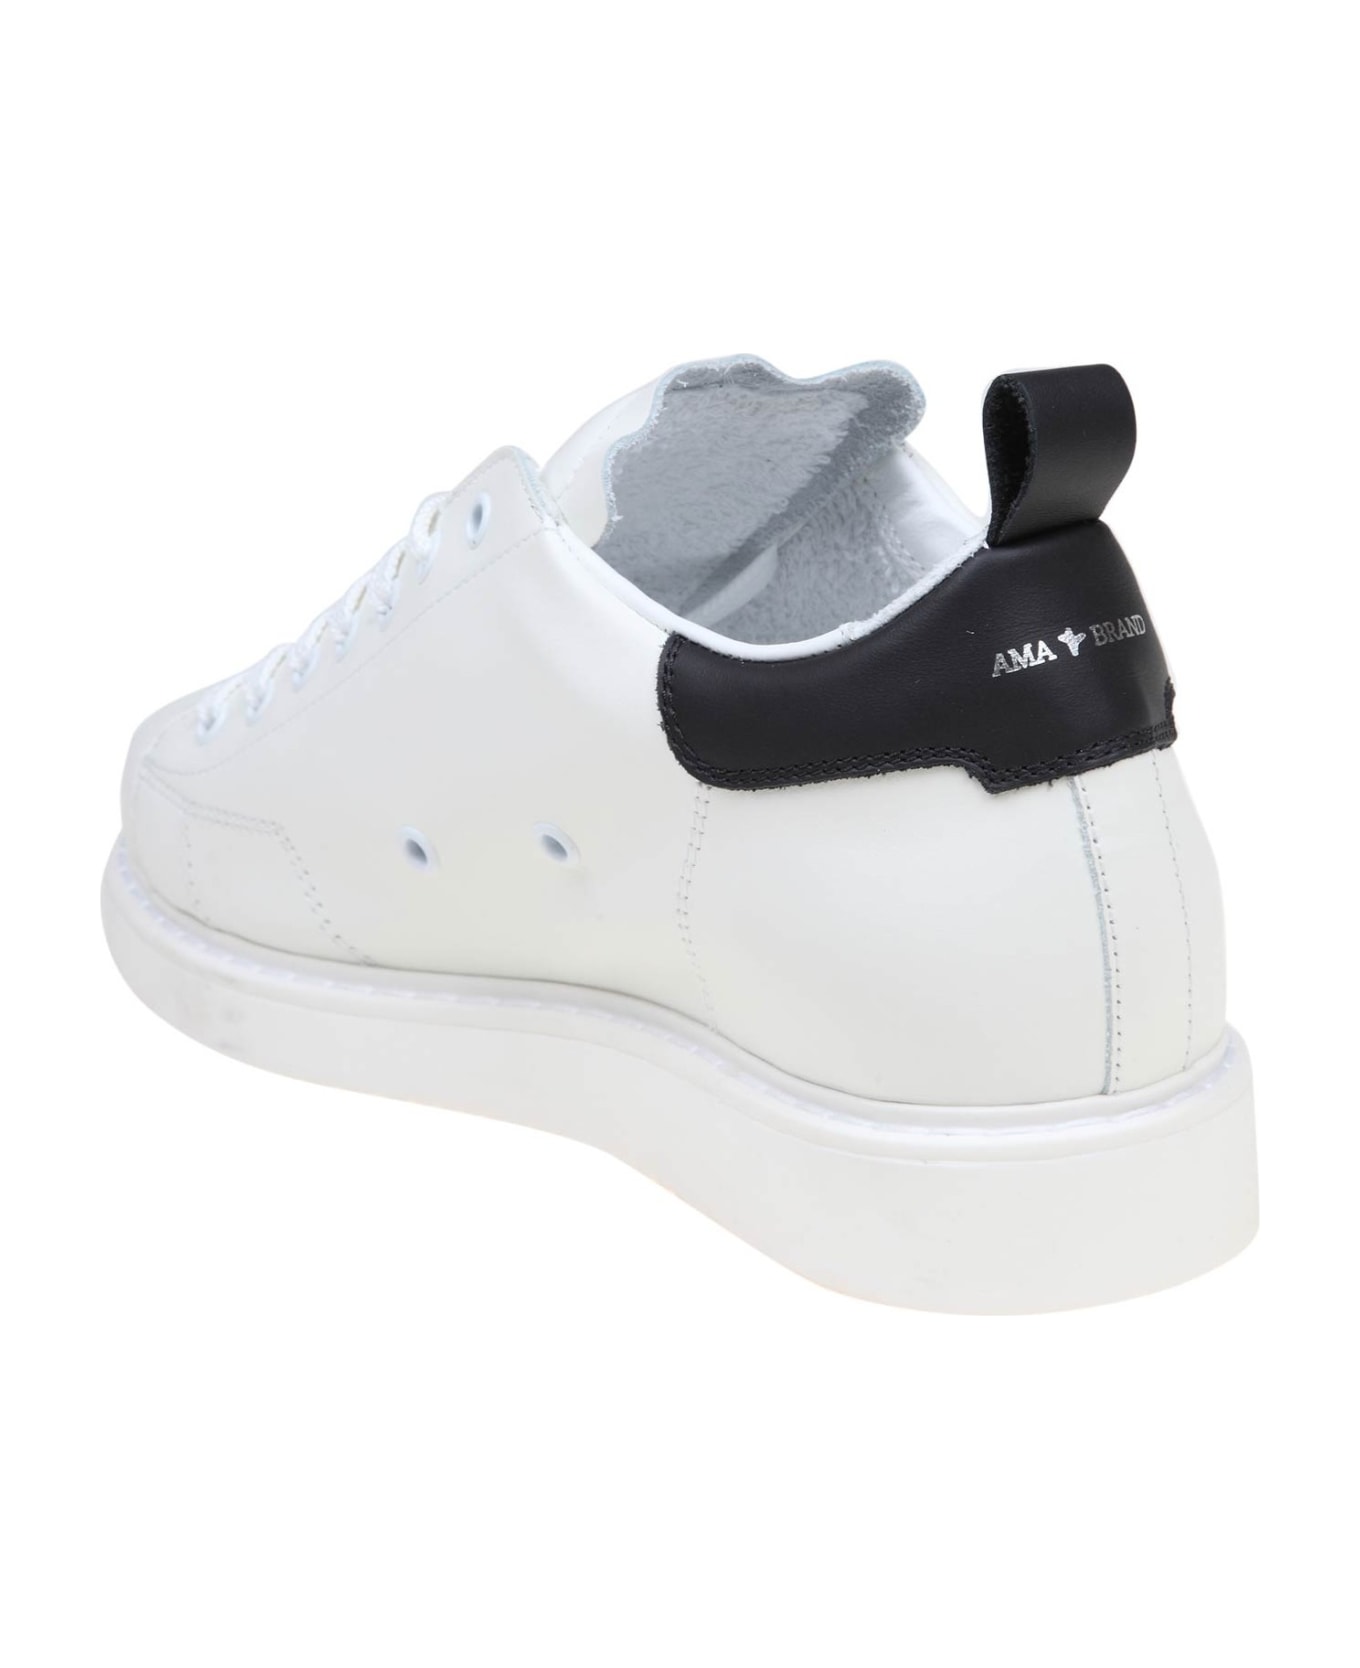 AMA-BRAND Black And White Leather Sneakers - white/black